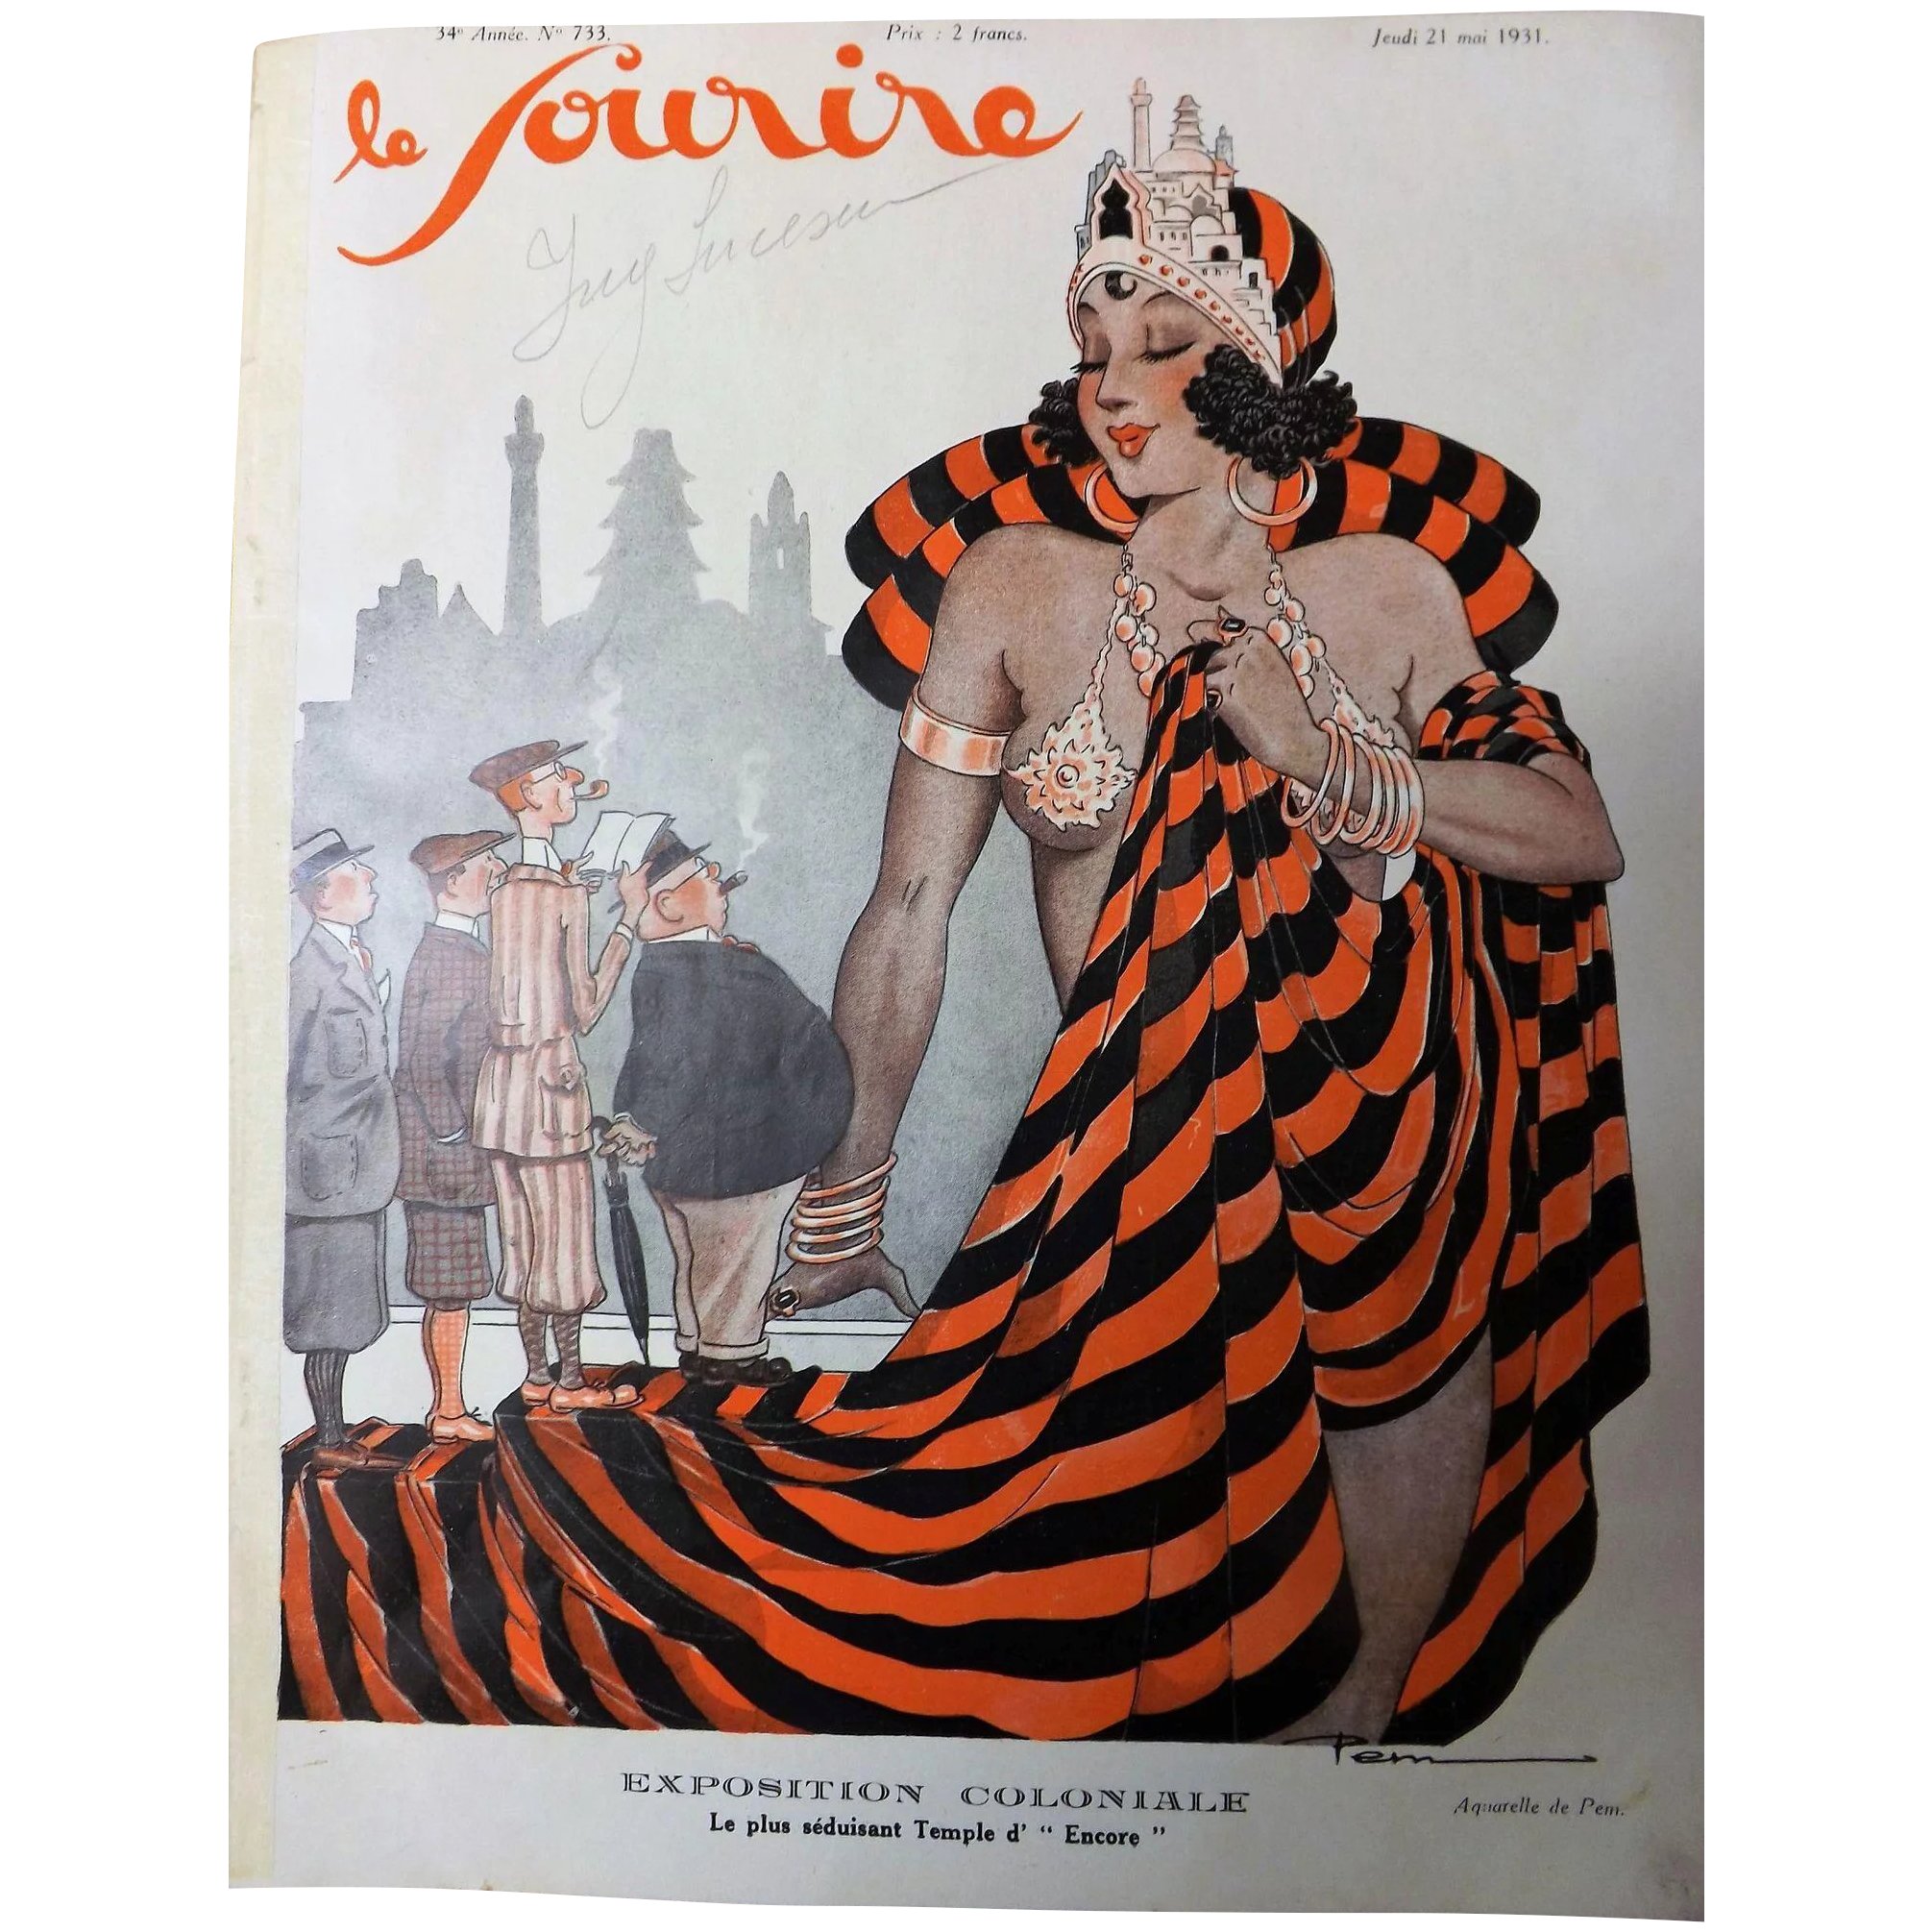 Front Page of Le Sourire Magazine 21 May 1931